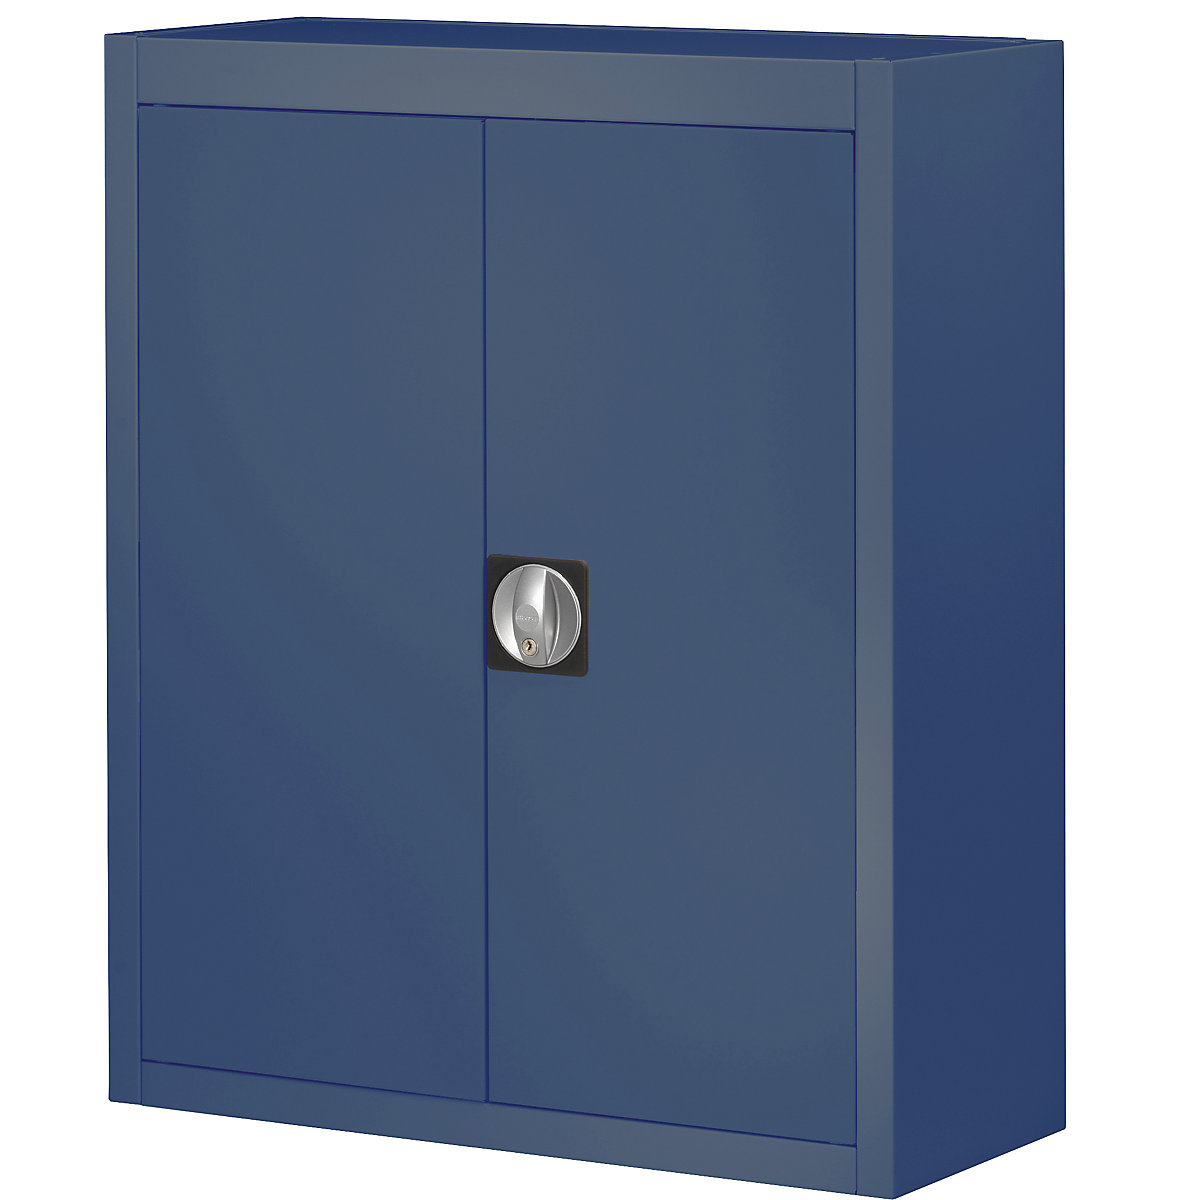 Storage cupboard, without open fronted storage bins – mauser, HxWxD 820 x 680 x 280 mm, single colour, blue, 3+ items-4